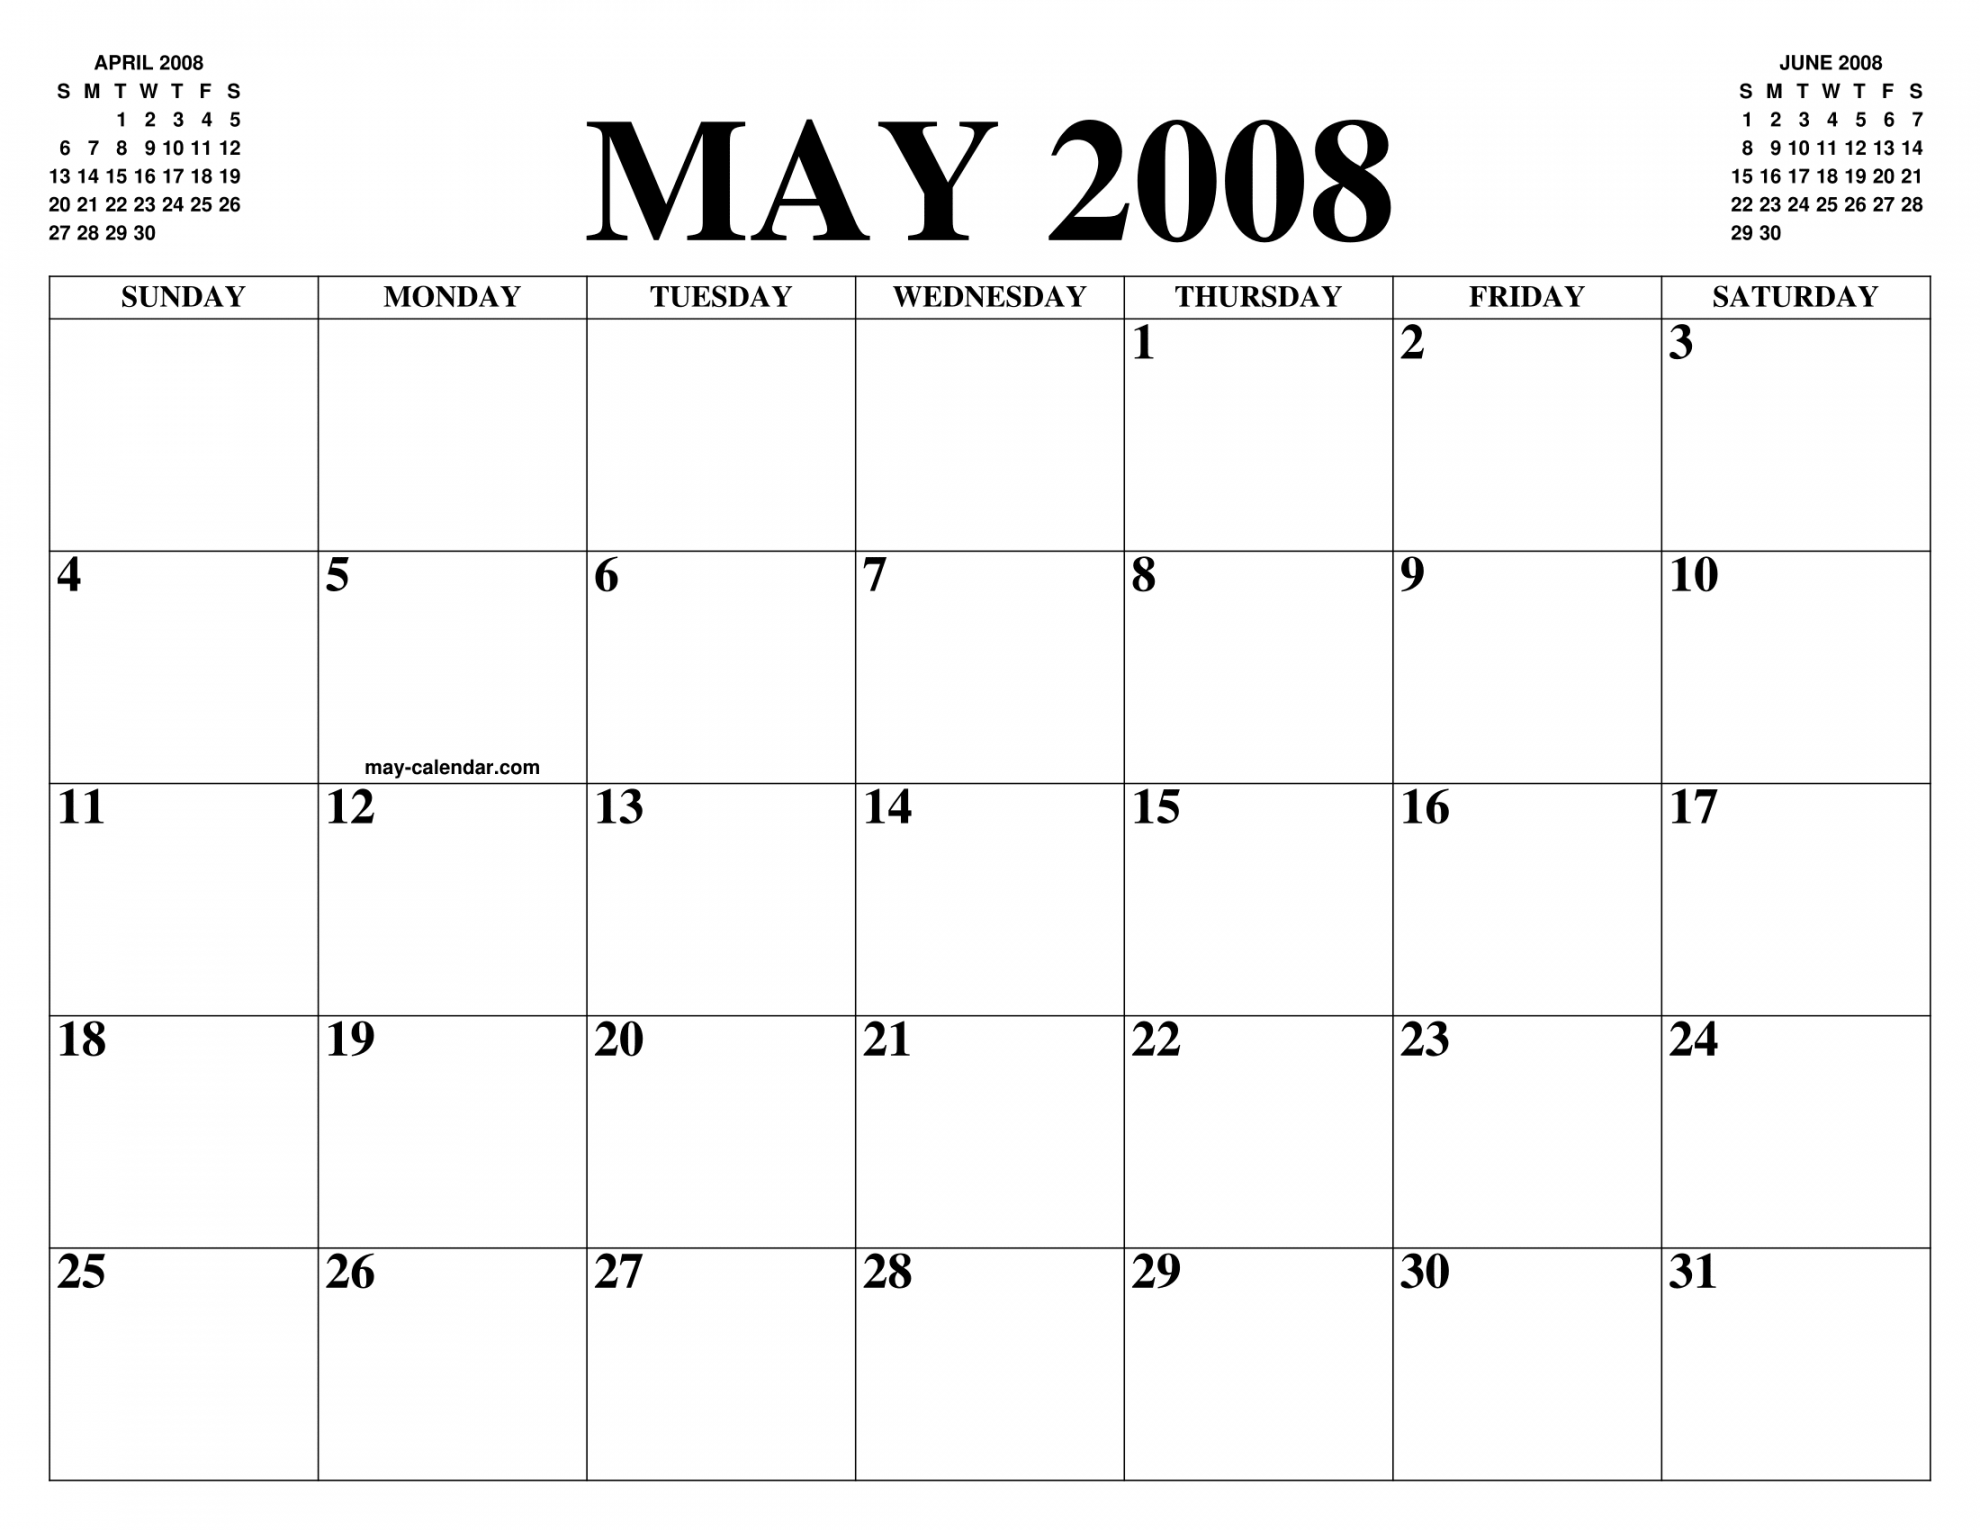 MAY  CALENDAR OF THE MONTH: FREE PRINTABLE MAY CALENDAR OF THE